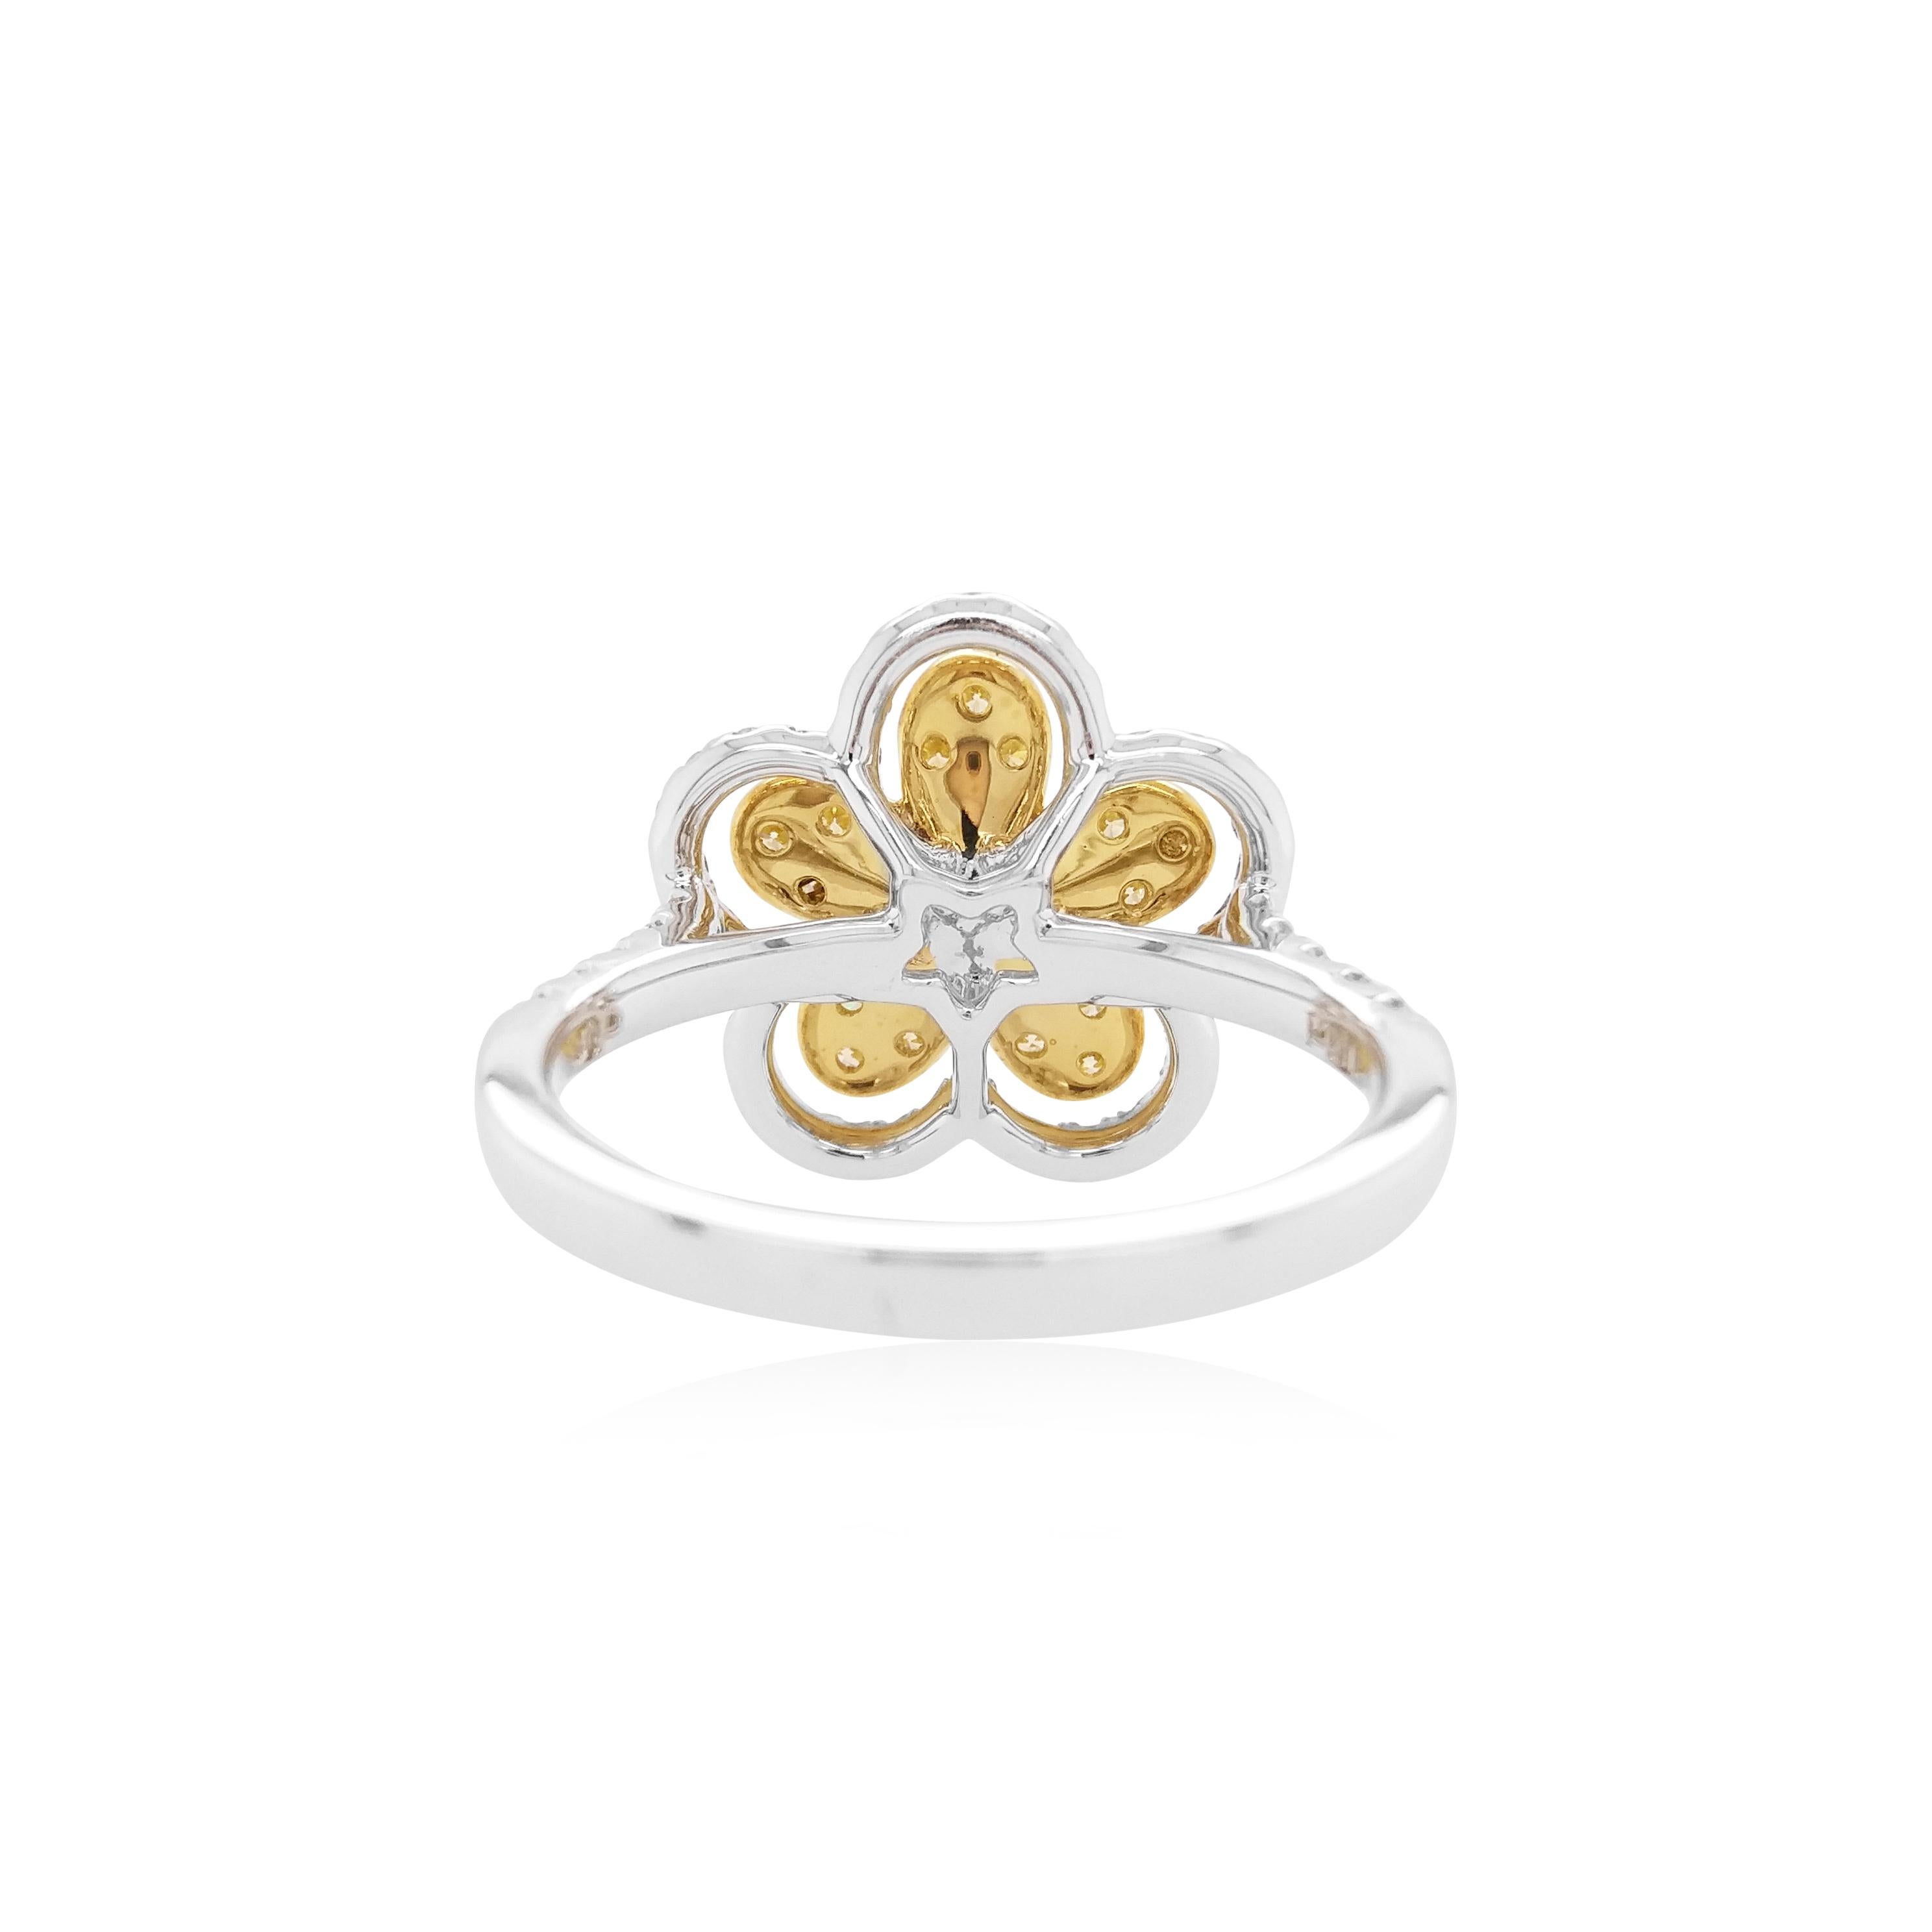 This unique floral ring features spectacular natural White and Yellow diamonds at its centre, surrounded by a bold pattern dazzling white diamonds. The perfect piece to take you from day to night, this ring will elevate any outfit - especially when